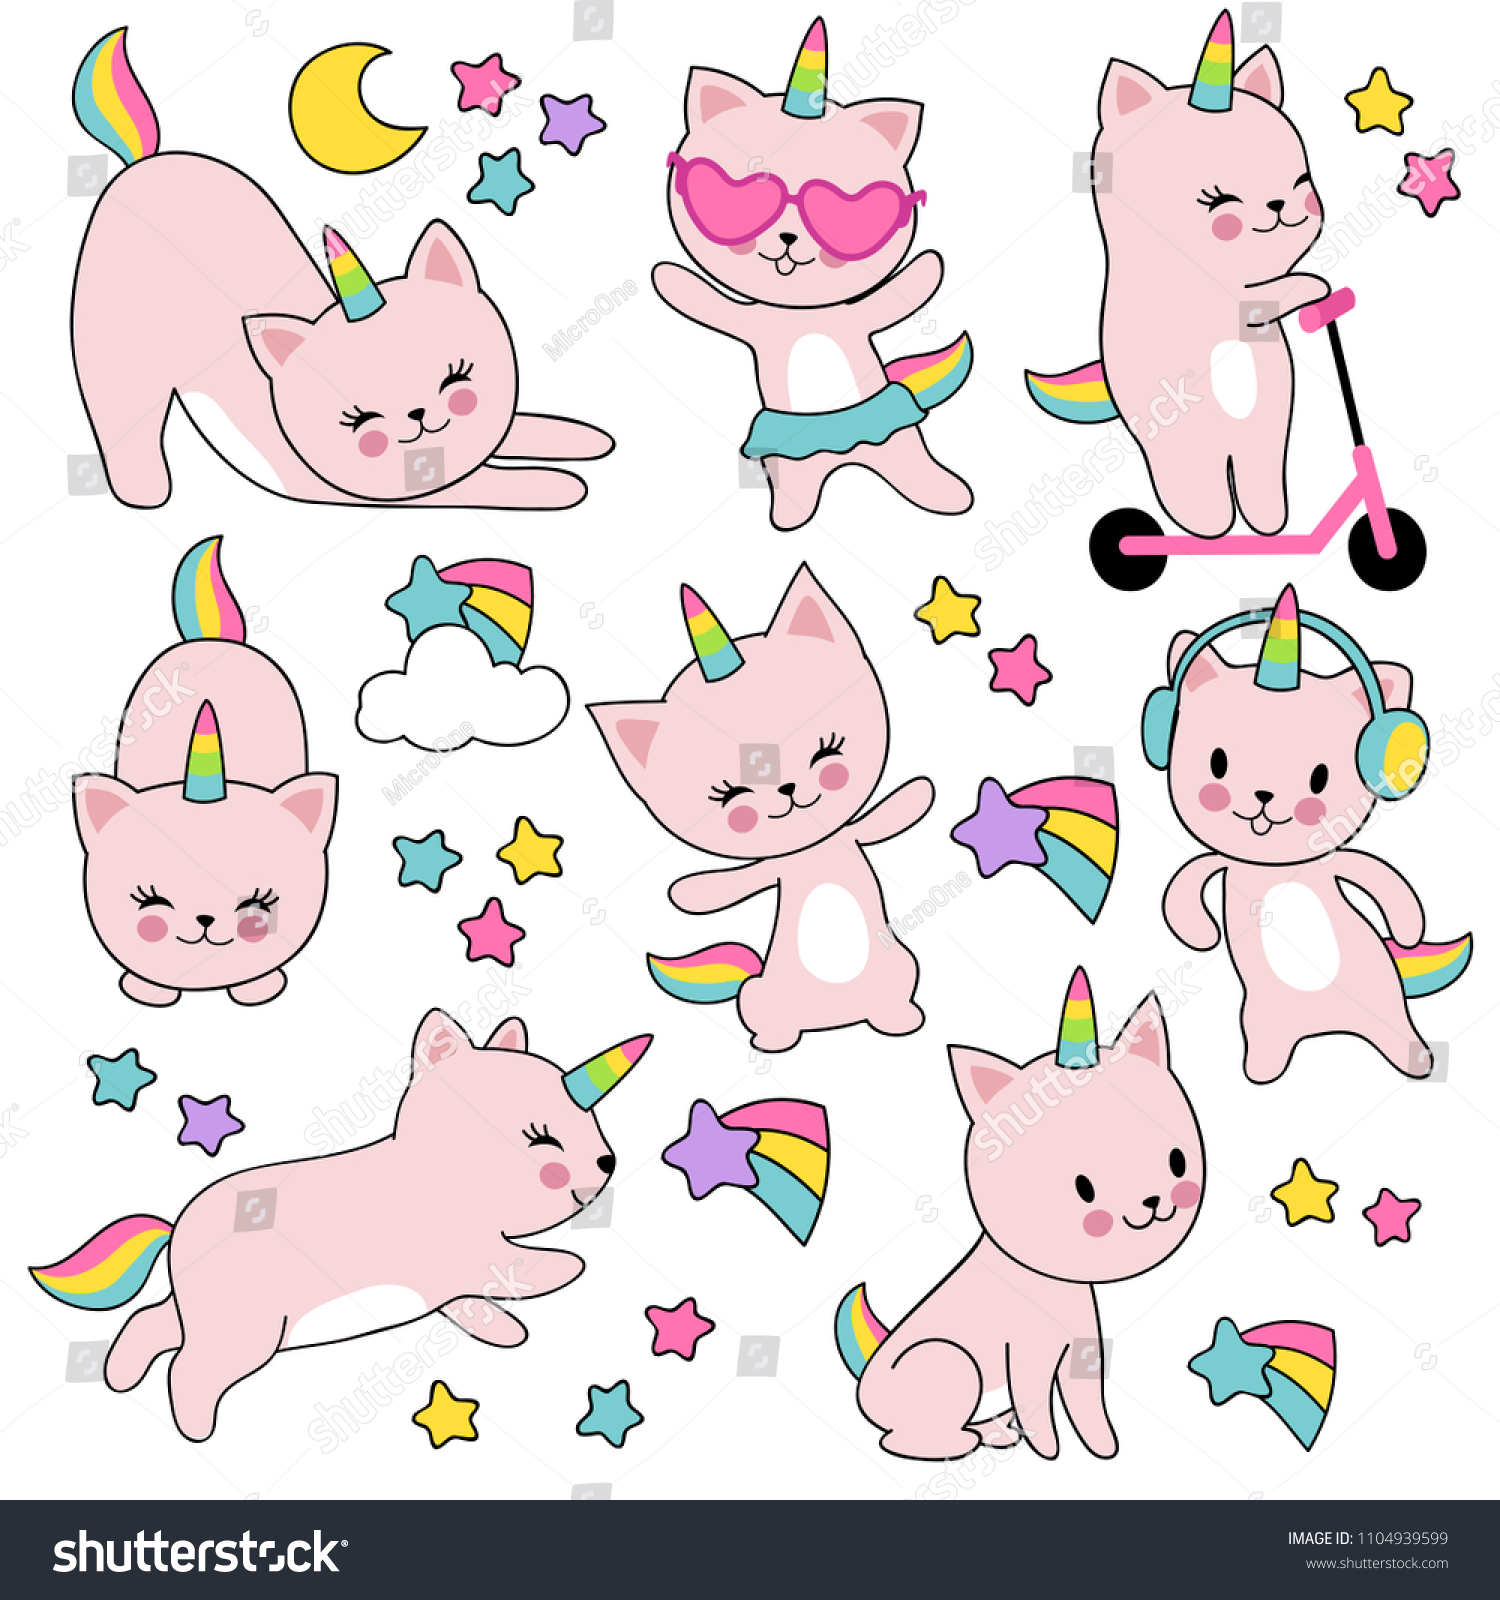 SVG of Cartoon cute white cat unicorns. Funny caticorn kittens vector set. Character funny animal kitten with horn illustration svg